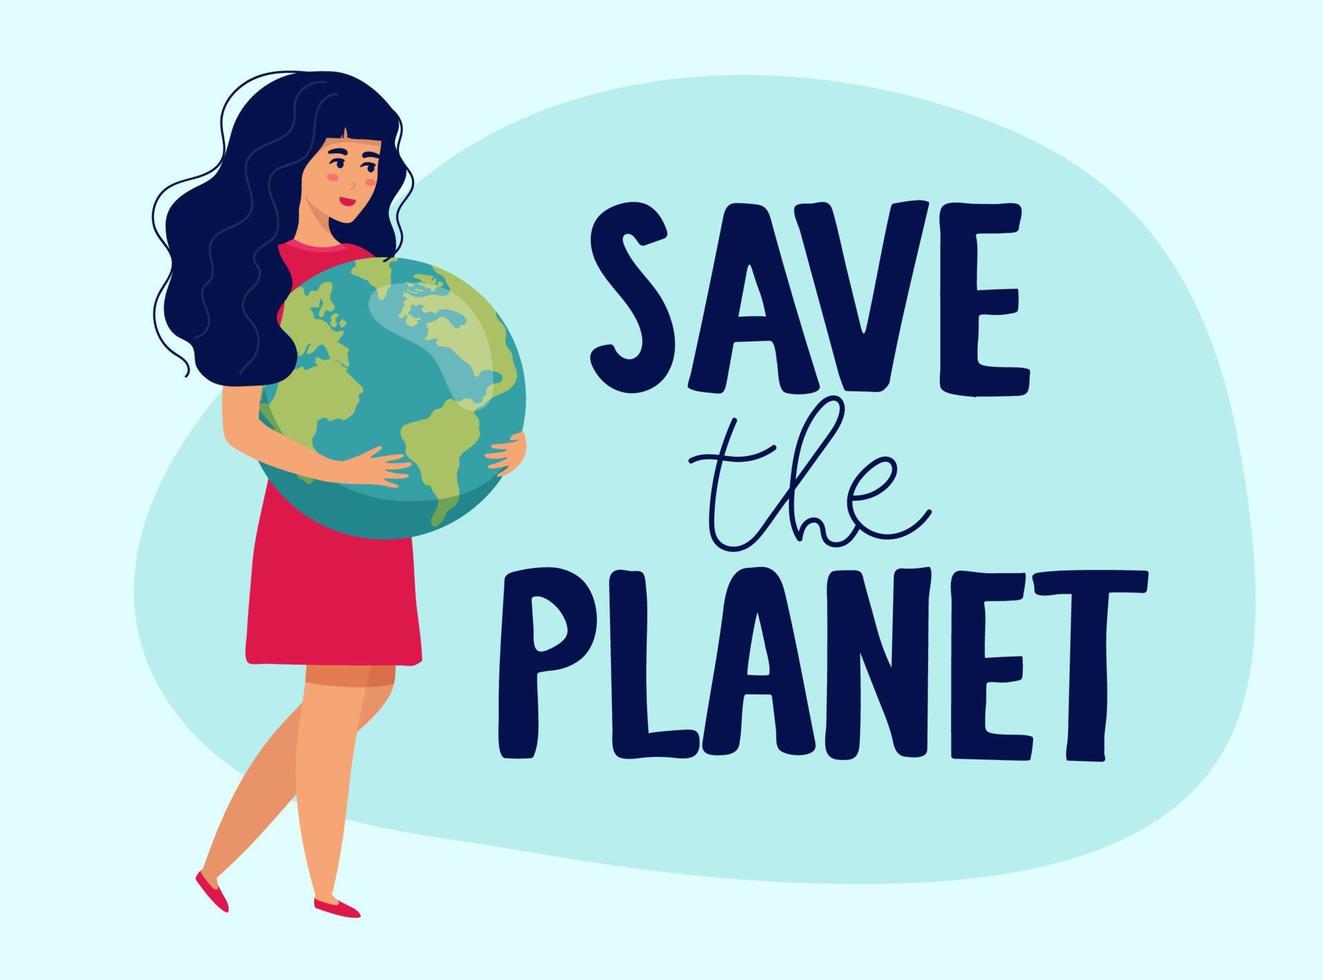 Young woman or girl embraces green planet Earth with care, love. Vector illustration of Earth day and saving planet. Environment conservation, energy saving concept. lettering save the planet